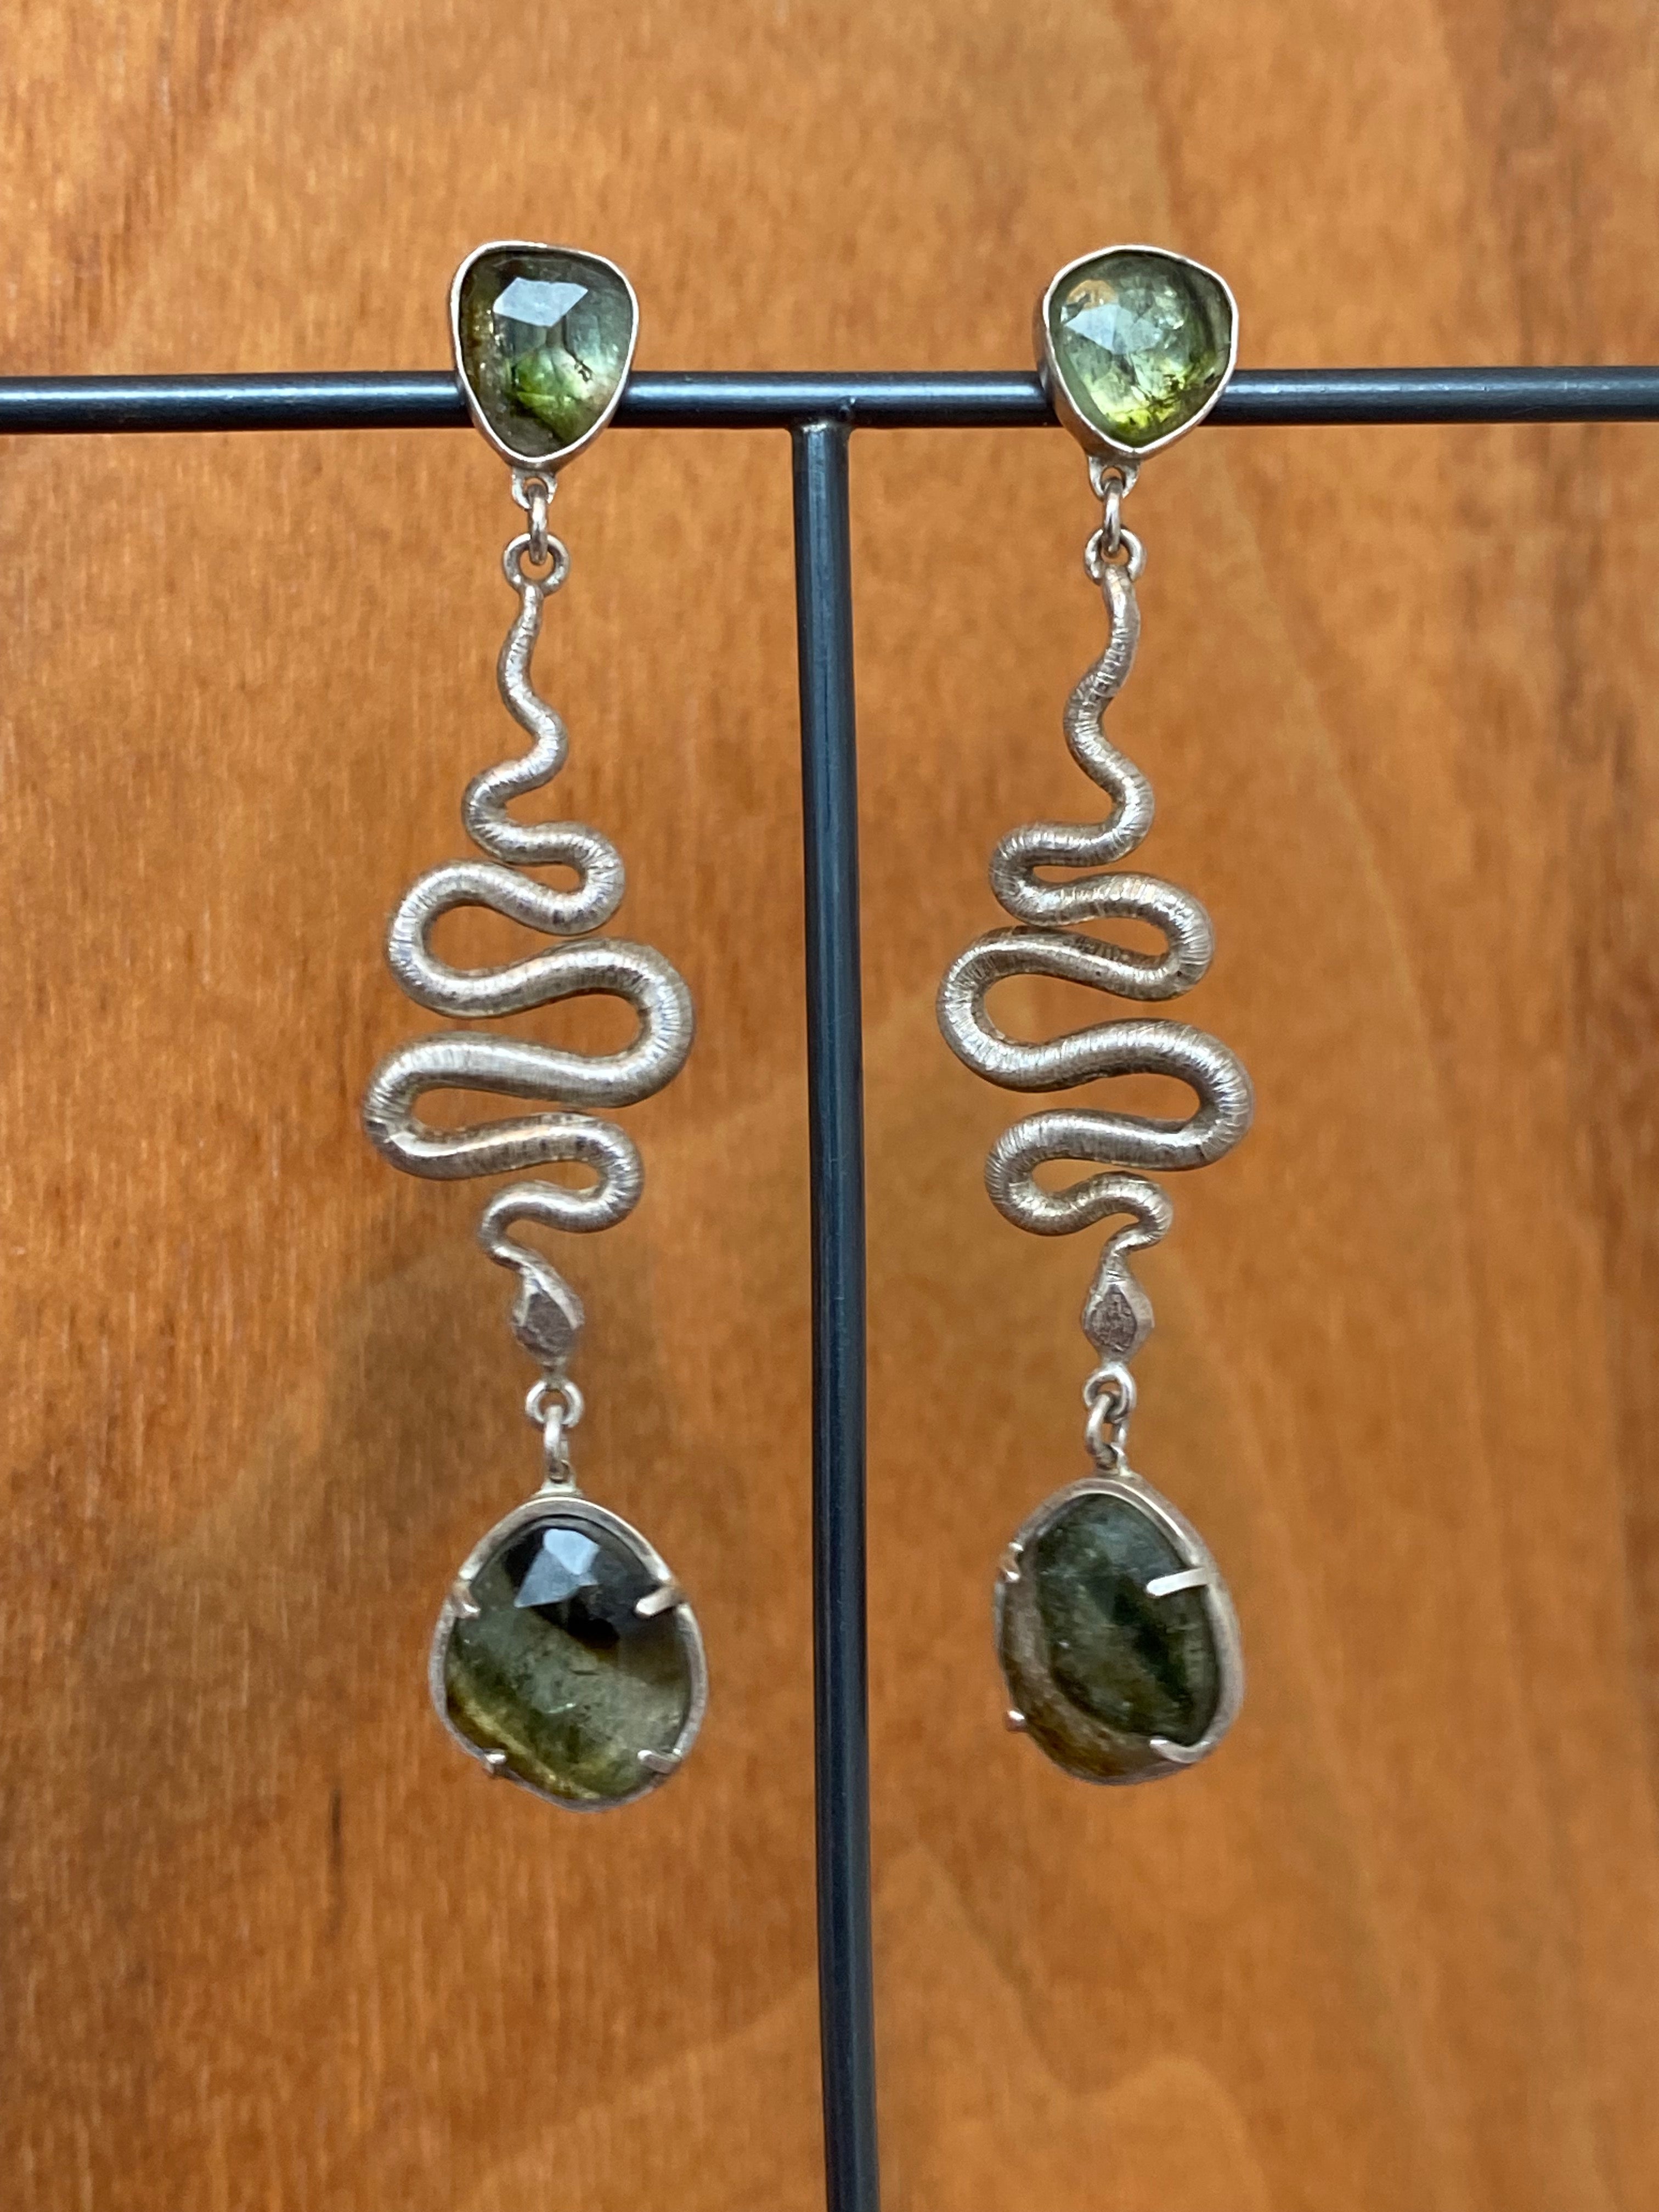 Koedyker Crafted- Large Serpent Earrings with Green Tourmaline